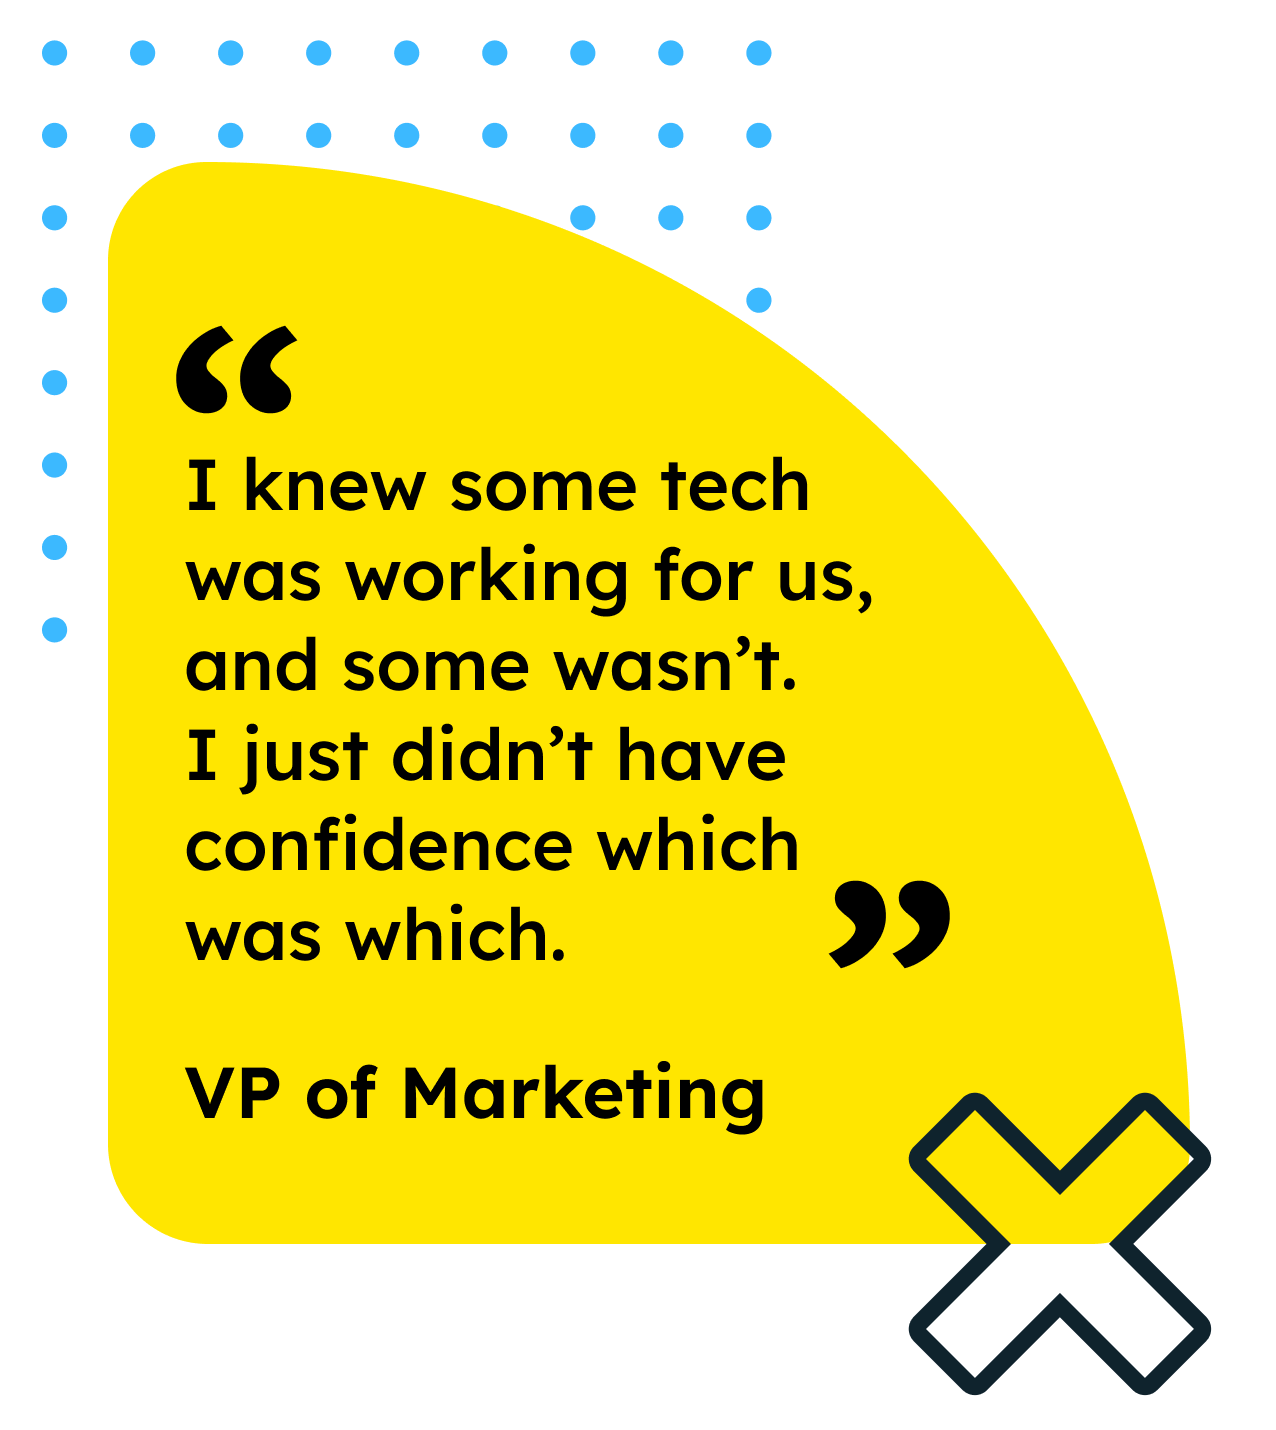 Quote from VP of Marketing